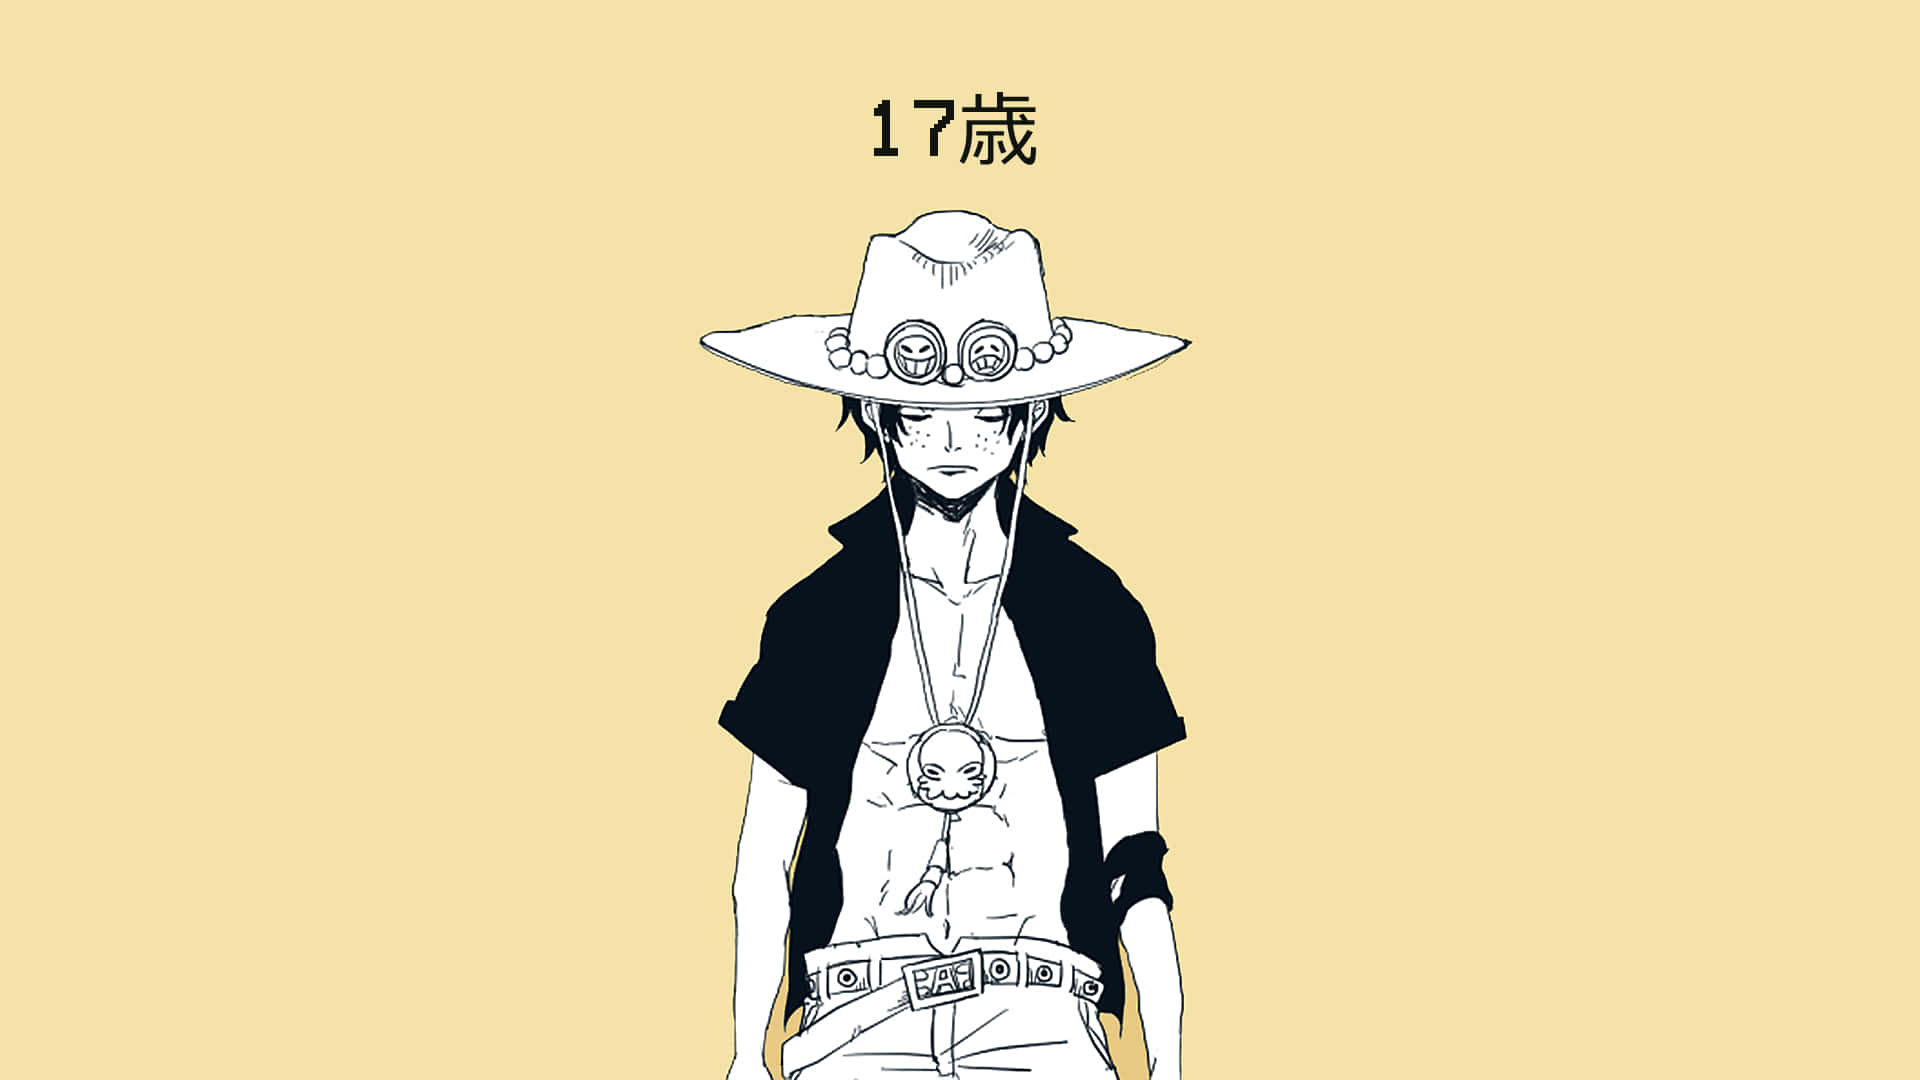 Portgas D Ace, The Captain Of The Whitebeard Pirates